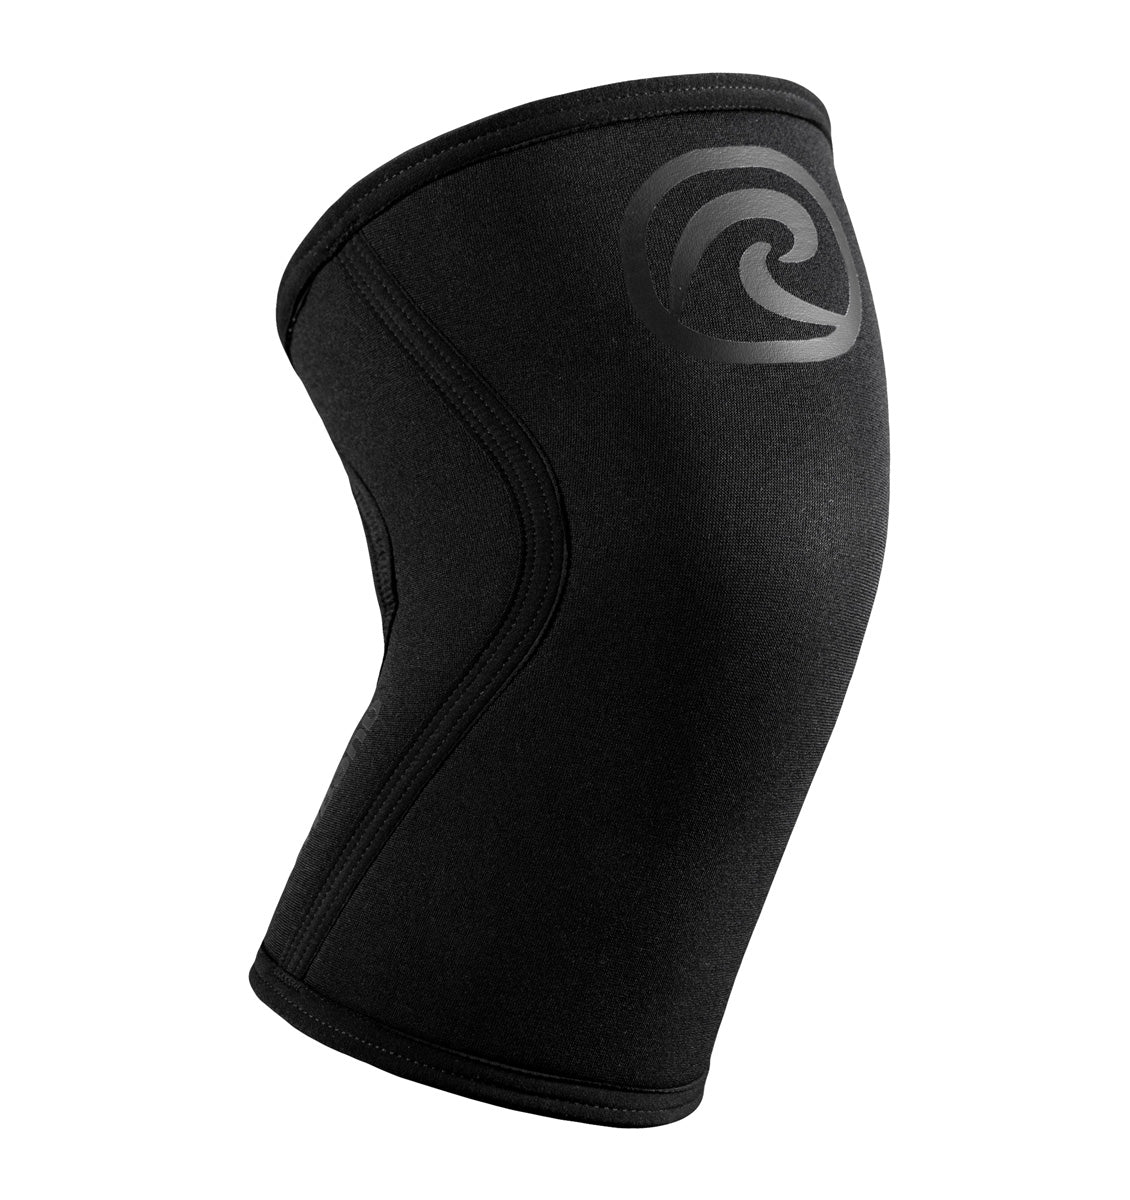 105466-01 Rehband Rx Knee Sleeve Carbon Black 7mm - Front